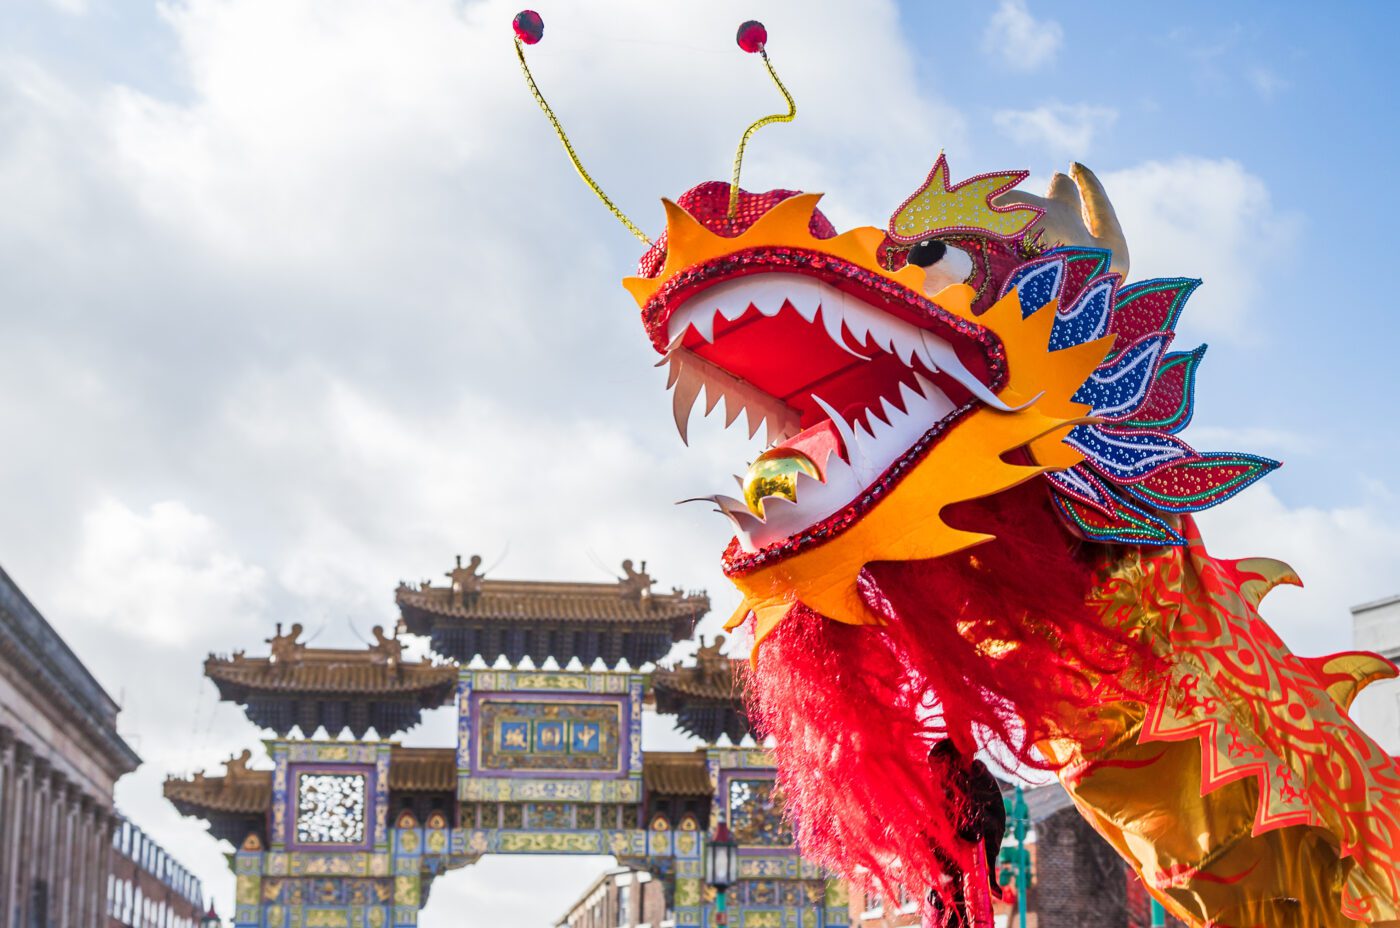 Chinese New Year celebrations with Dragon puppetry in Liverpool's Chinatown